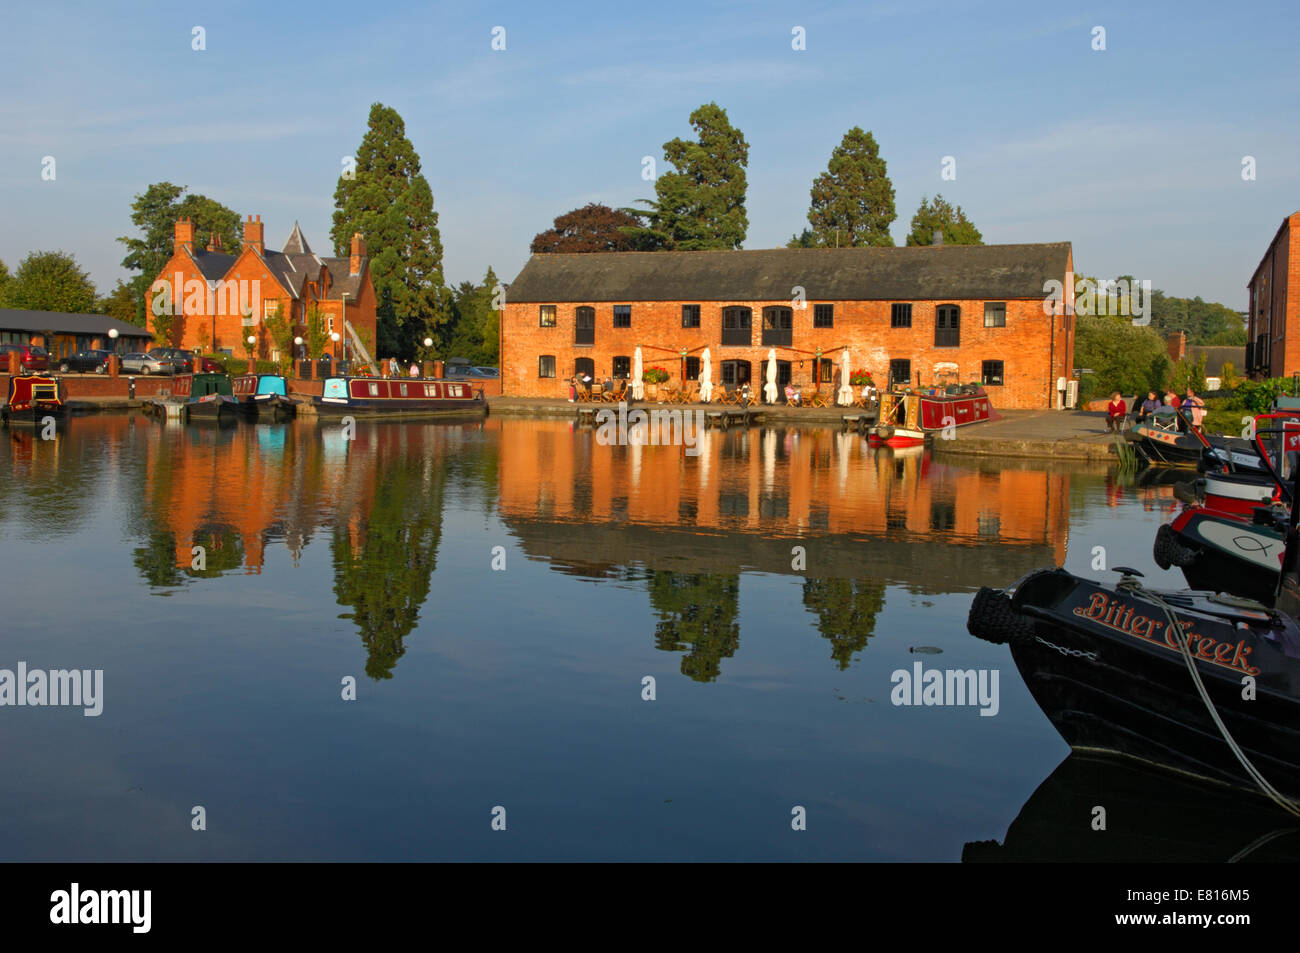 The Union Wharf canal basin in Market Harborough, Leicestershire, England Stock Photo